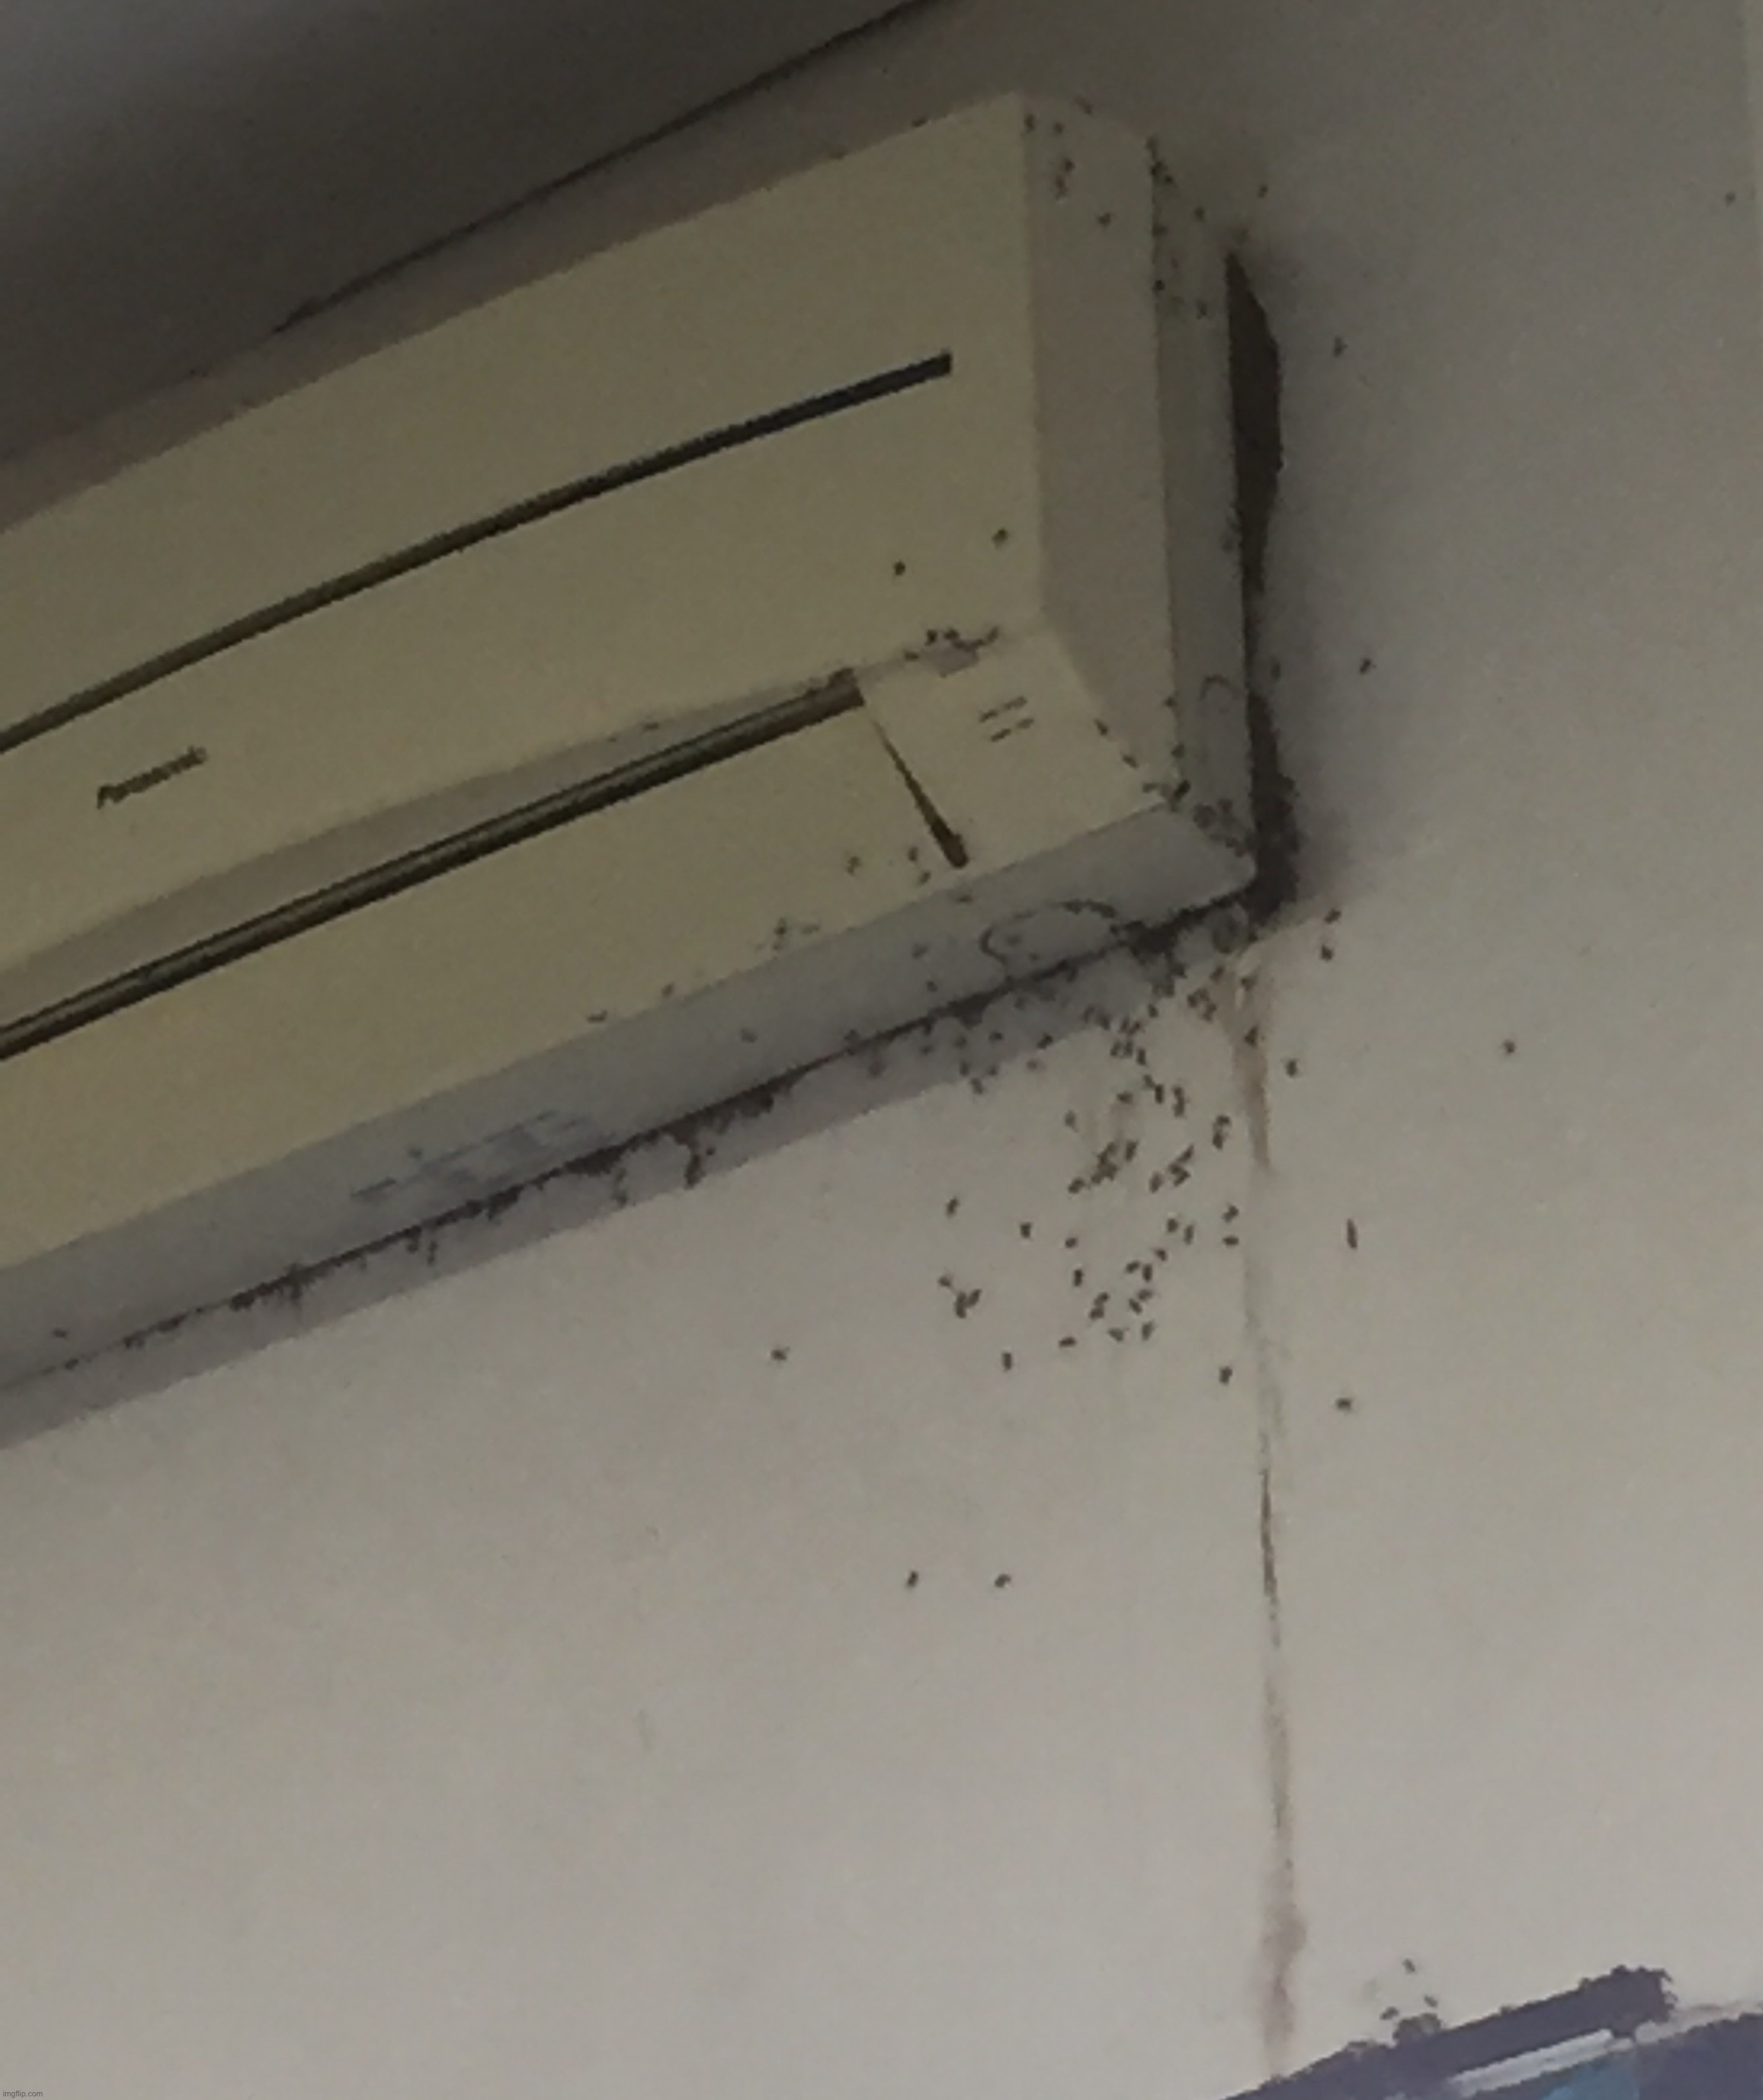 So this is what Covid-19 pandemic done to my class air cooler... IT BECOME A ANTHILL | image tagged in cursed image,anthill,air cooler,ac,ants,ant | made w/ Imgflip meme maker